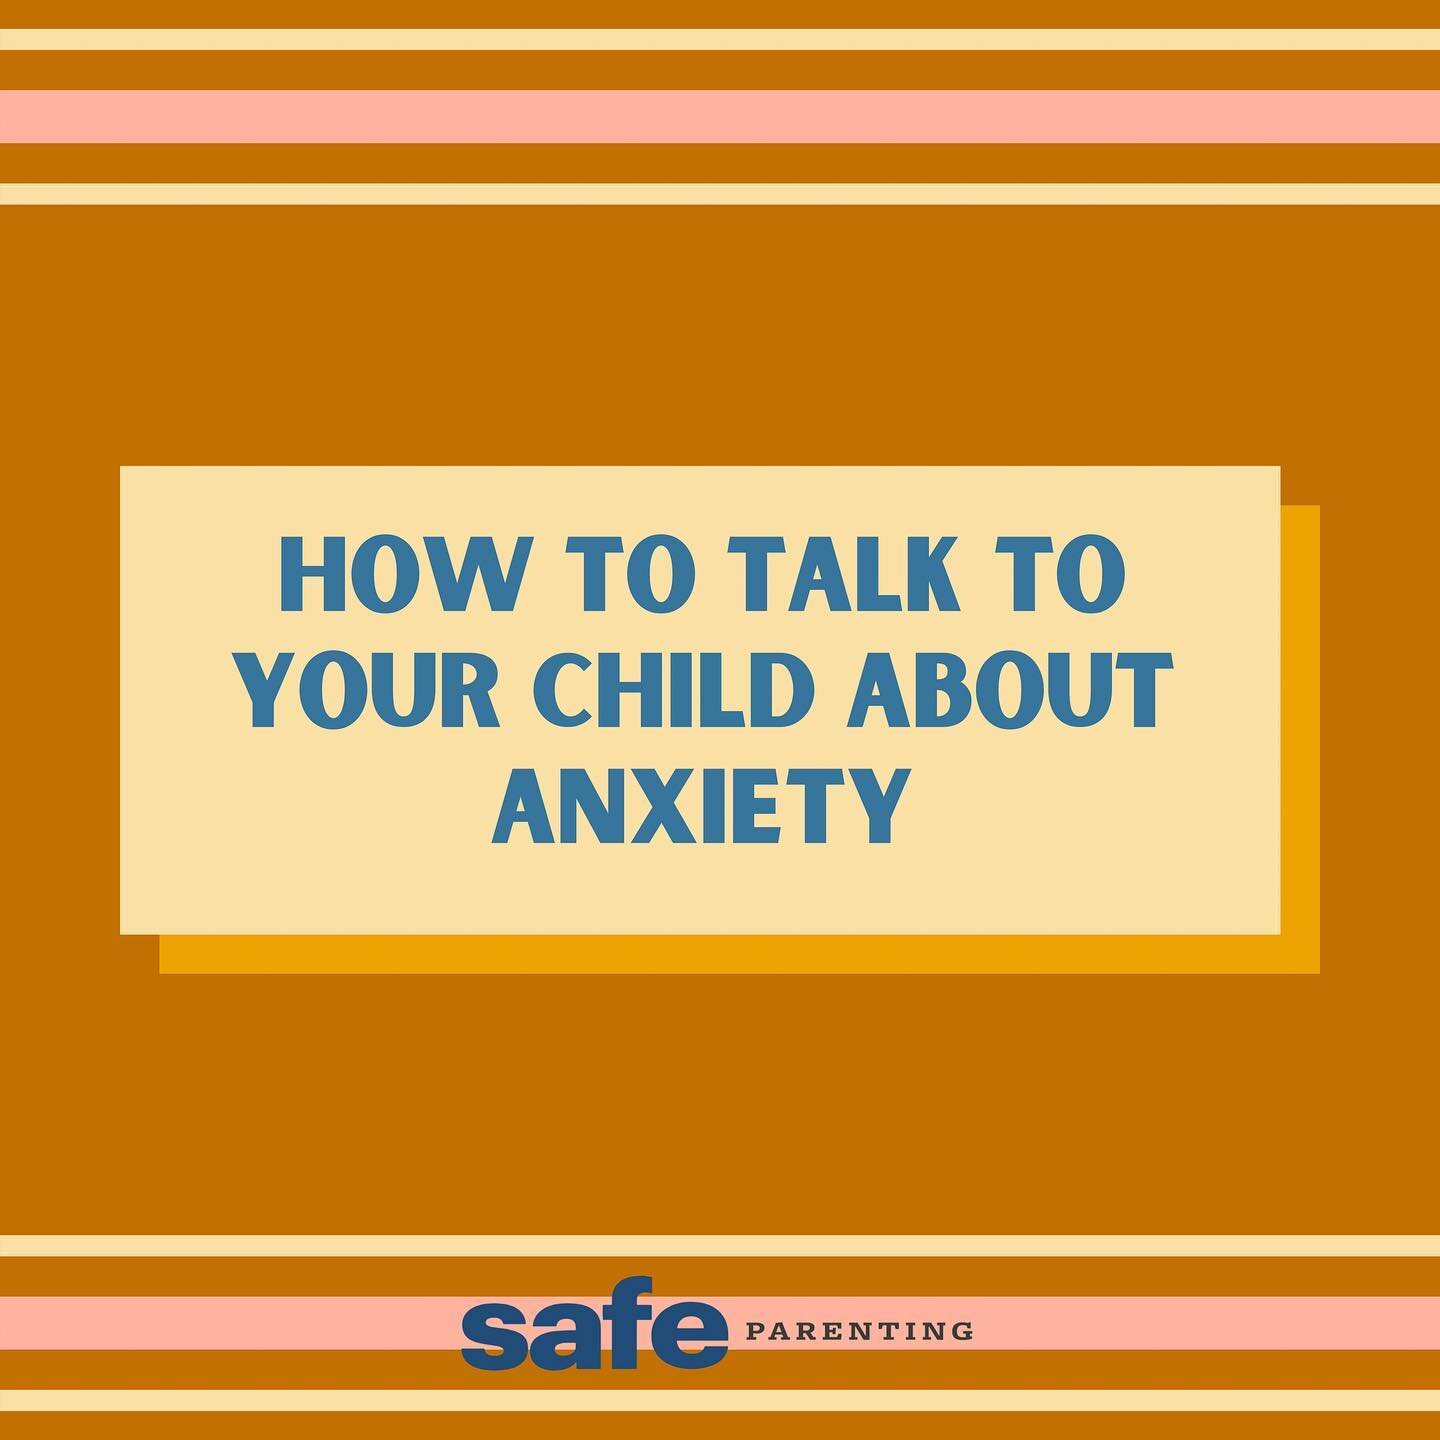 Big feelings like anxiety can be difficult for children to talk about, especially when they&rsquo;re back at school. Creating a safe space and guide them through communicating and expressing that feeling can help them develop healthy coping skills th